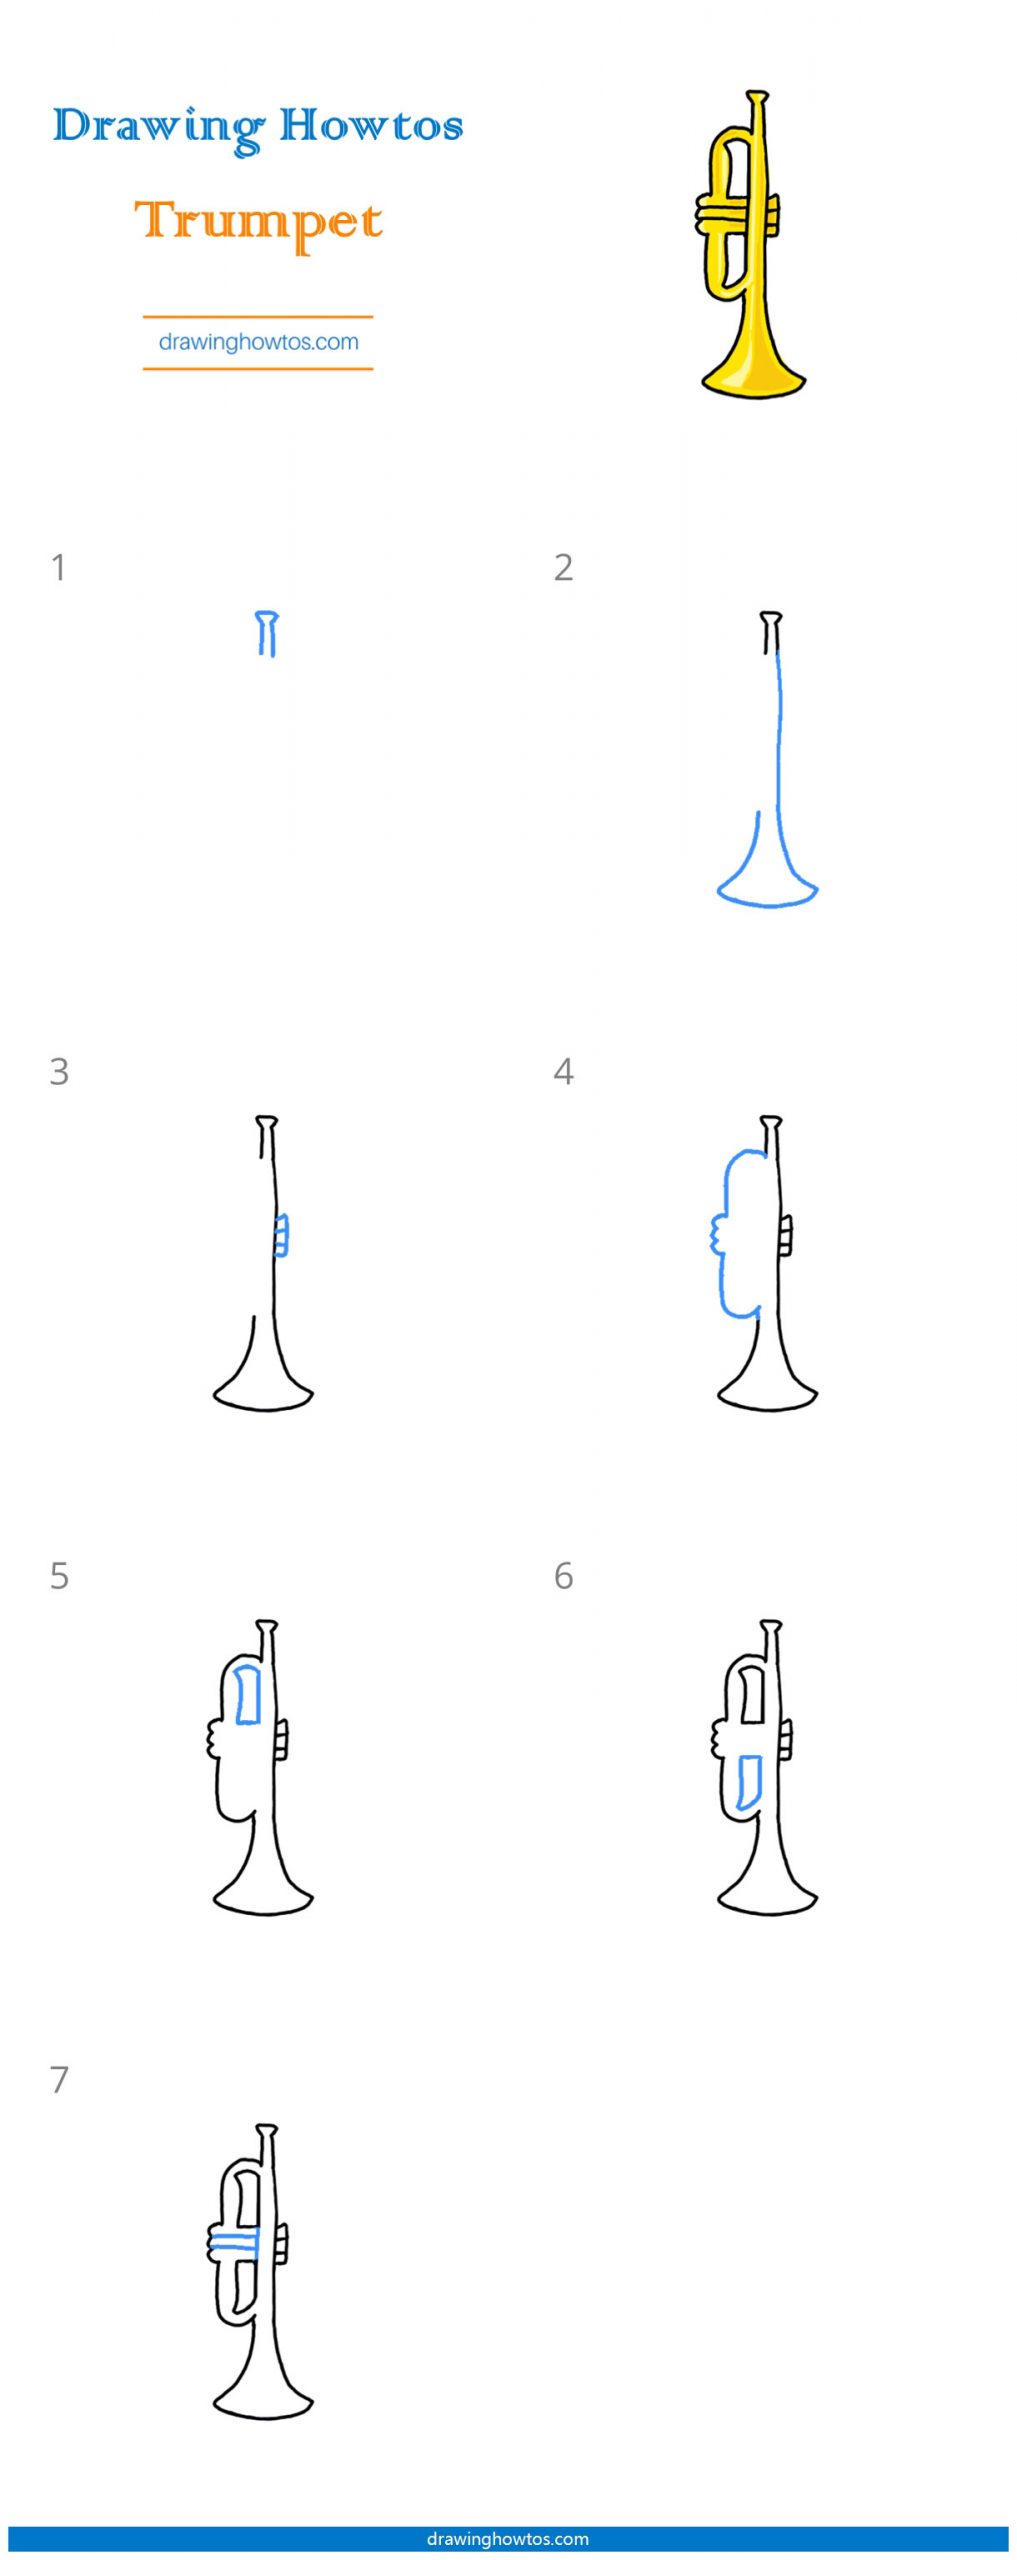 How to Draw a Trumpet - Step by Step Easy Drawing Guides - Drawing Howtos